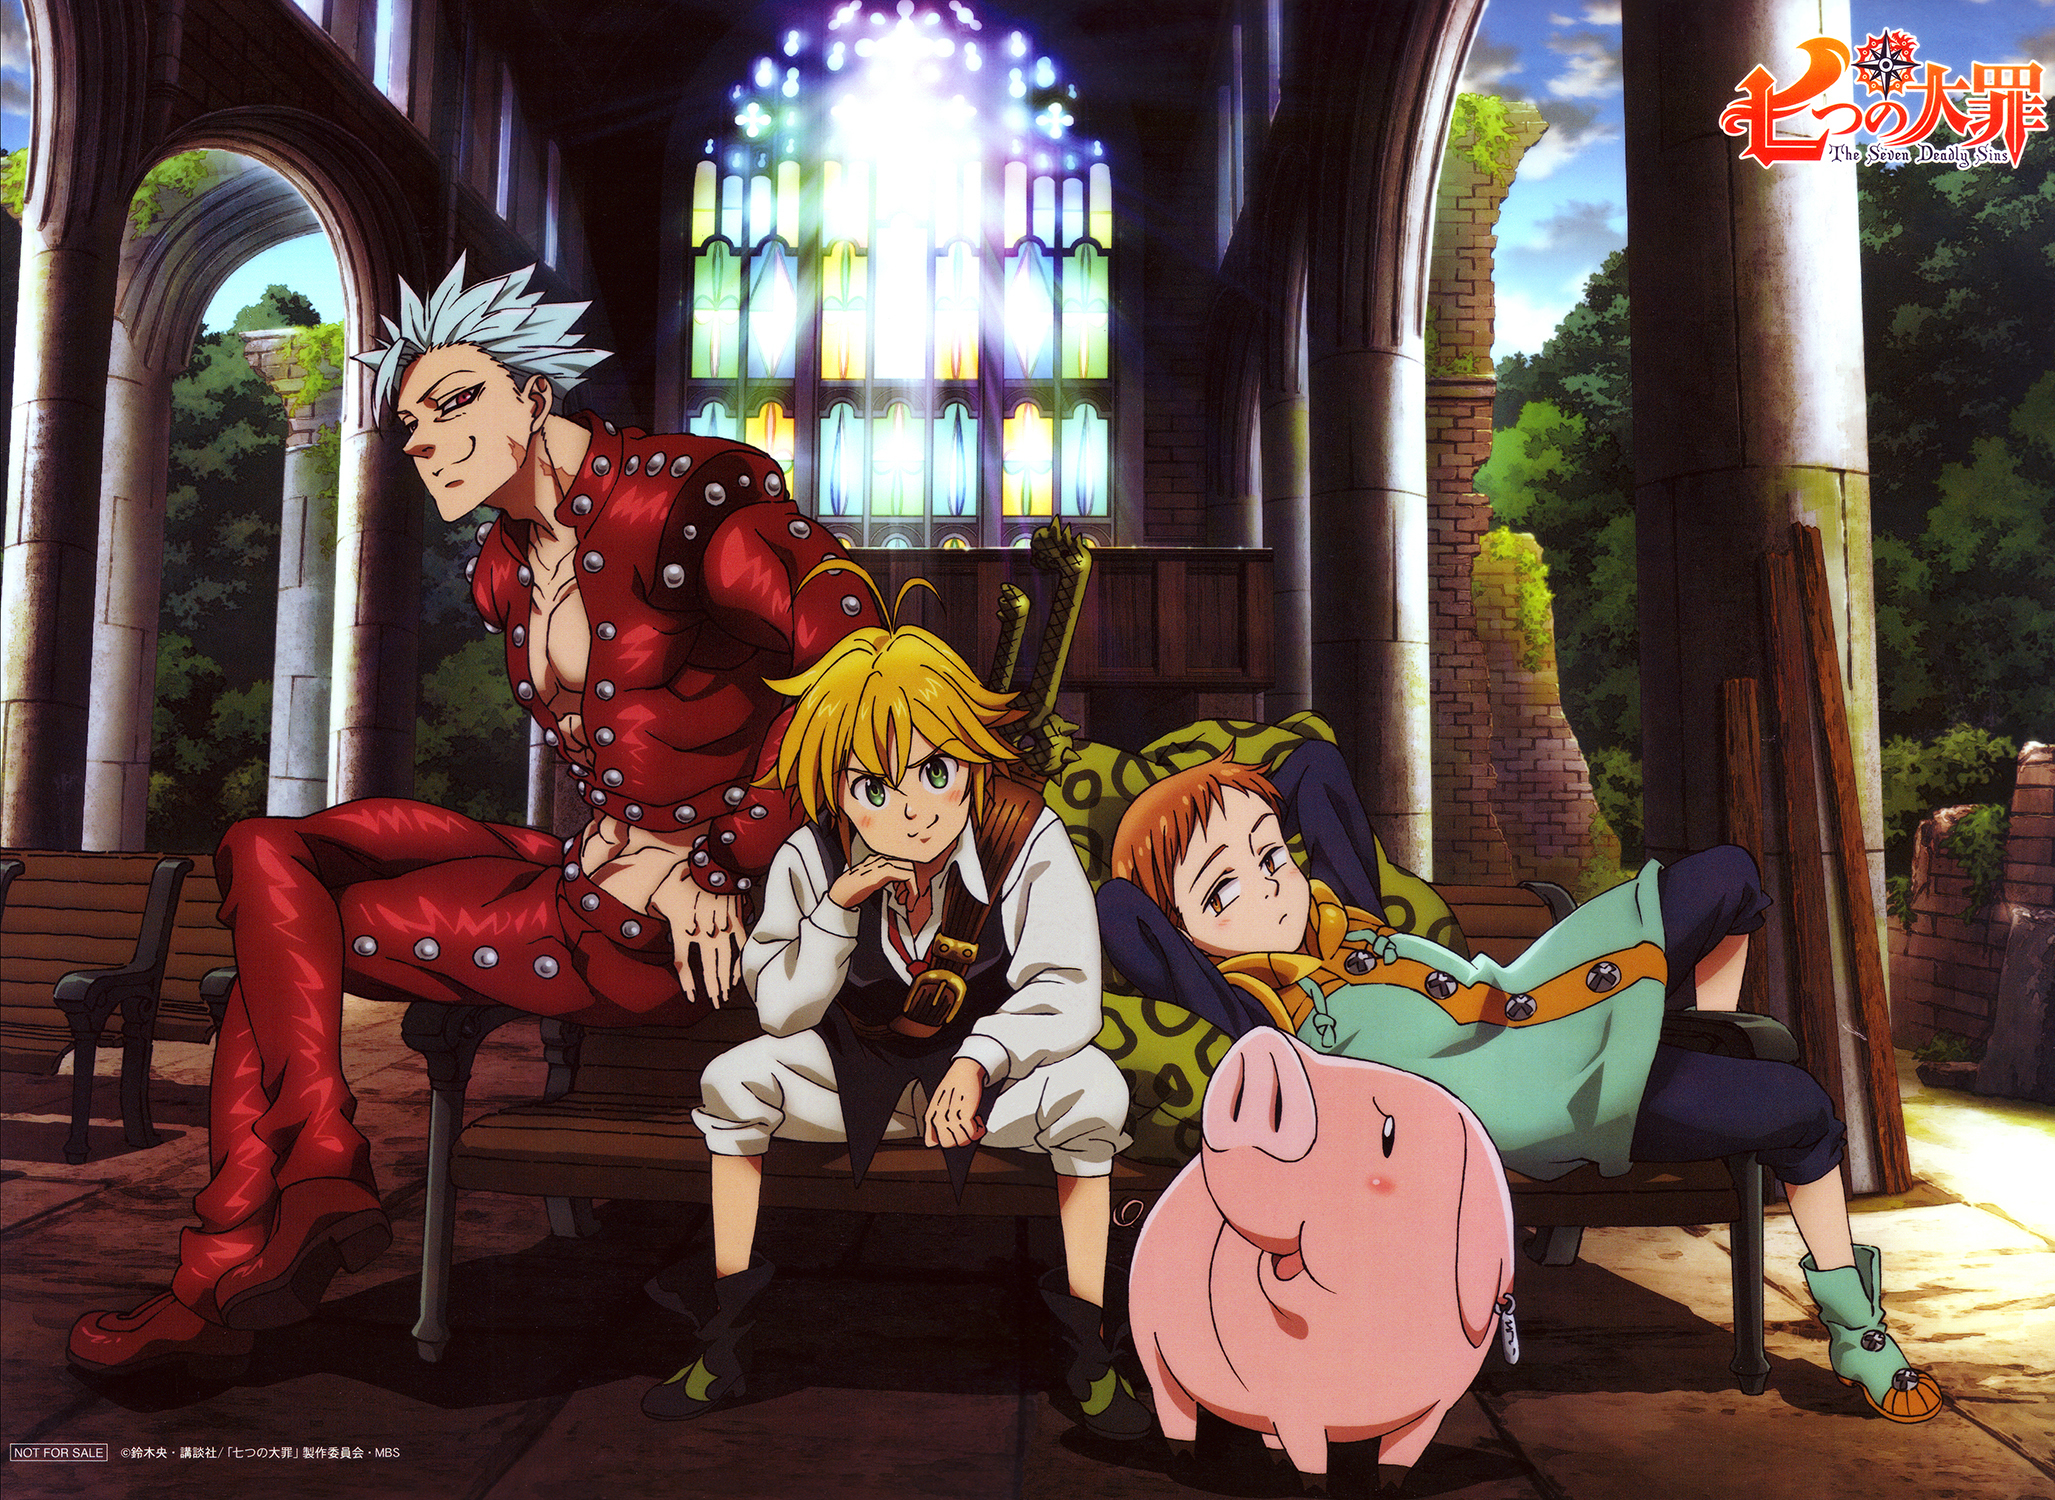 Ban (The Seven Deadly Sins) wallpapers for desktop, download free Ban (The  Seven Deadly Sins) pictures and backgrounds for PC 